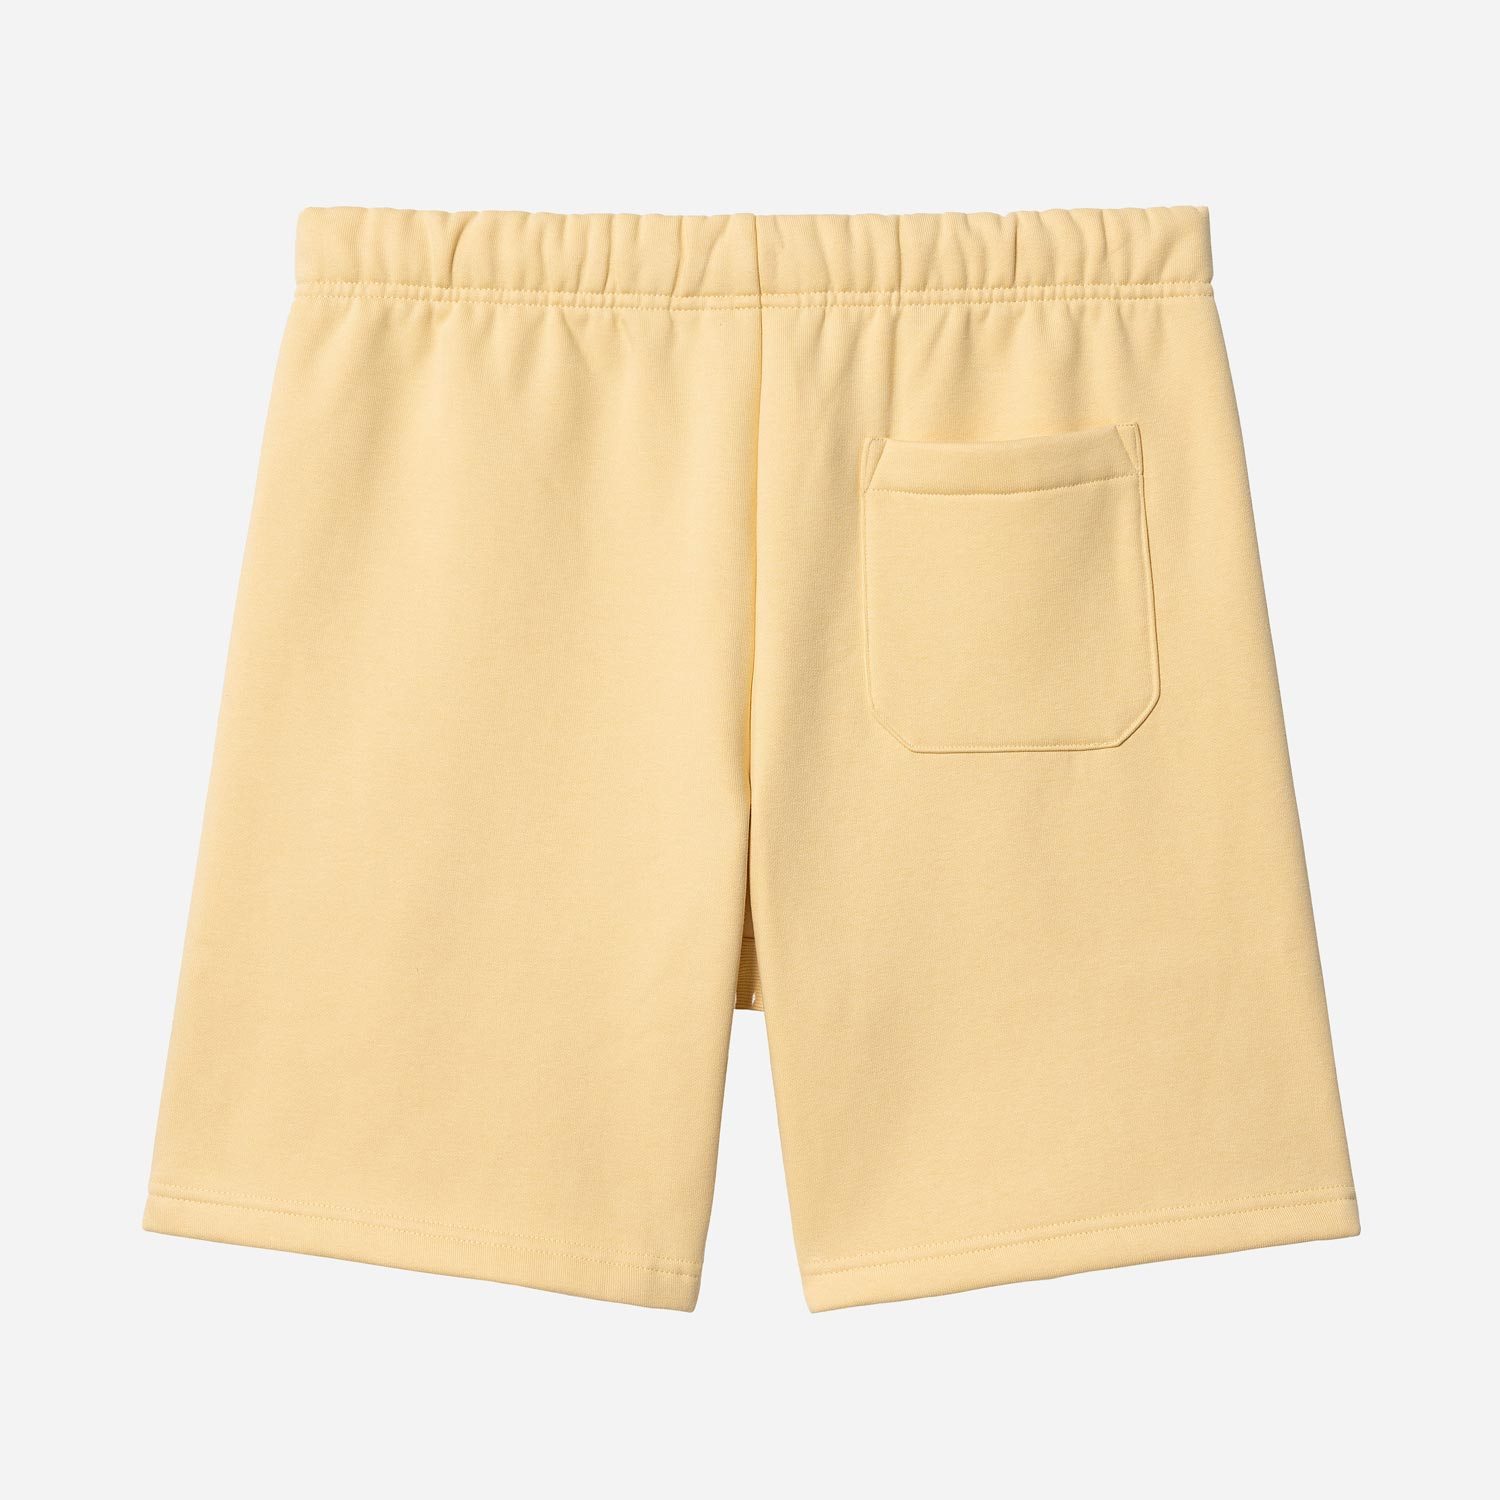 Carhartt WIP Chase Loose Fit Sweat Short - Citron/Gold